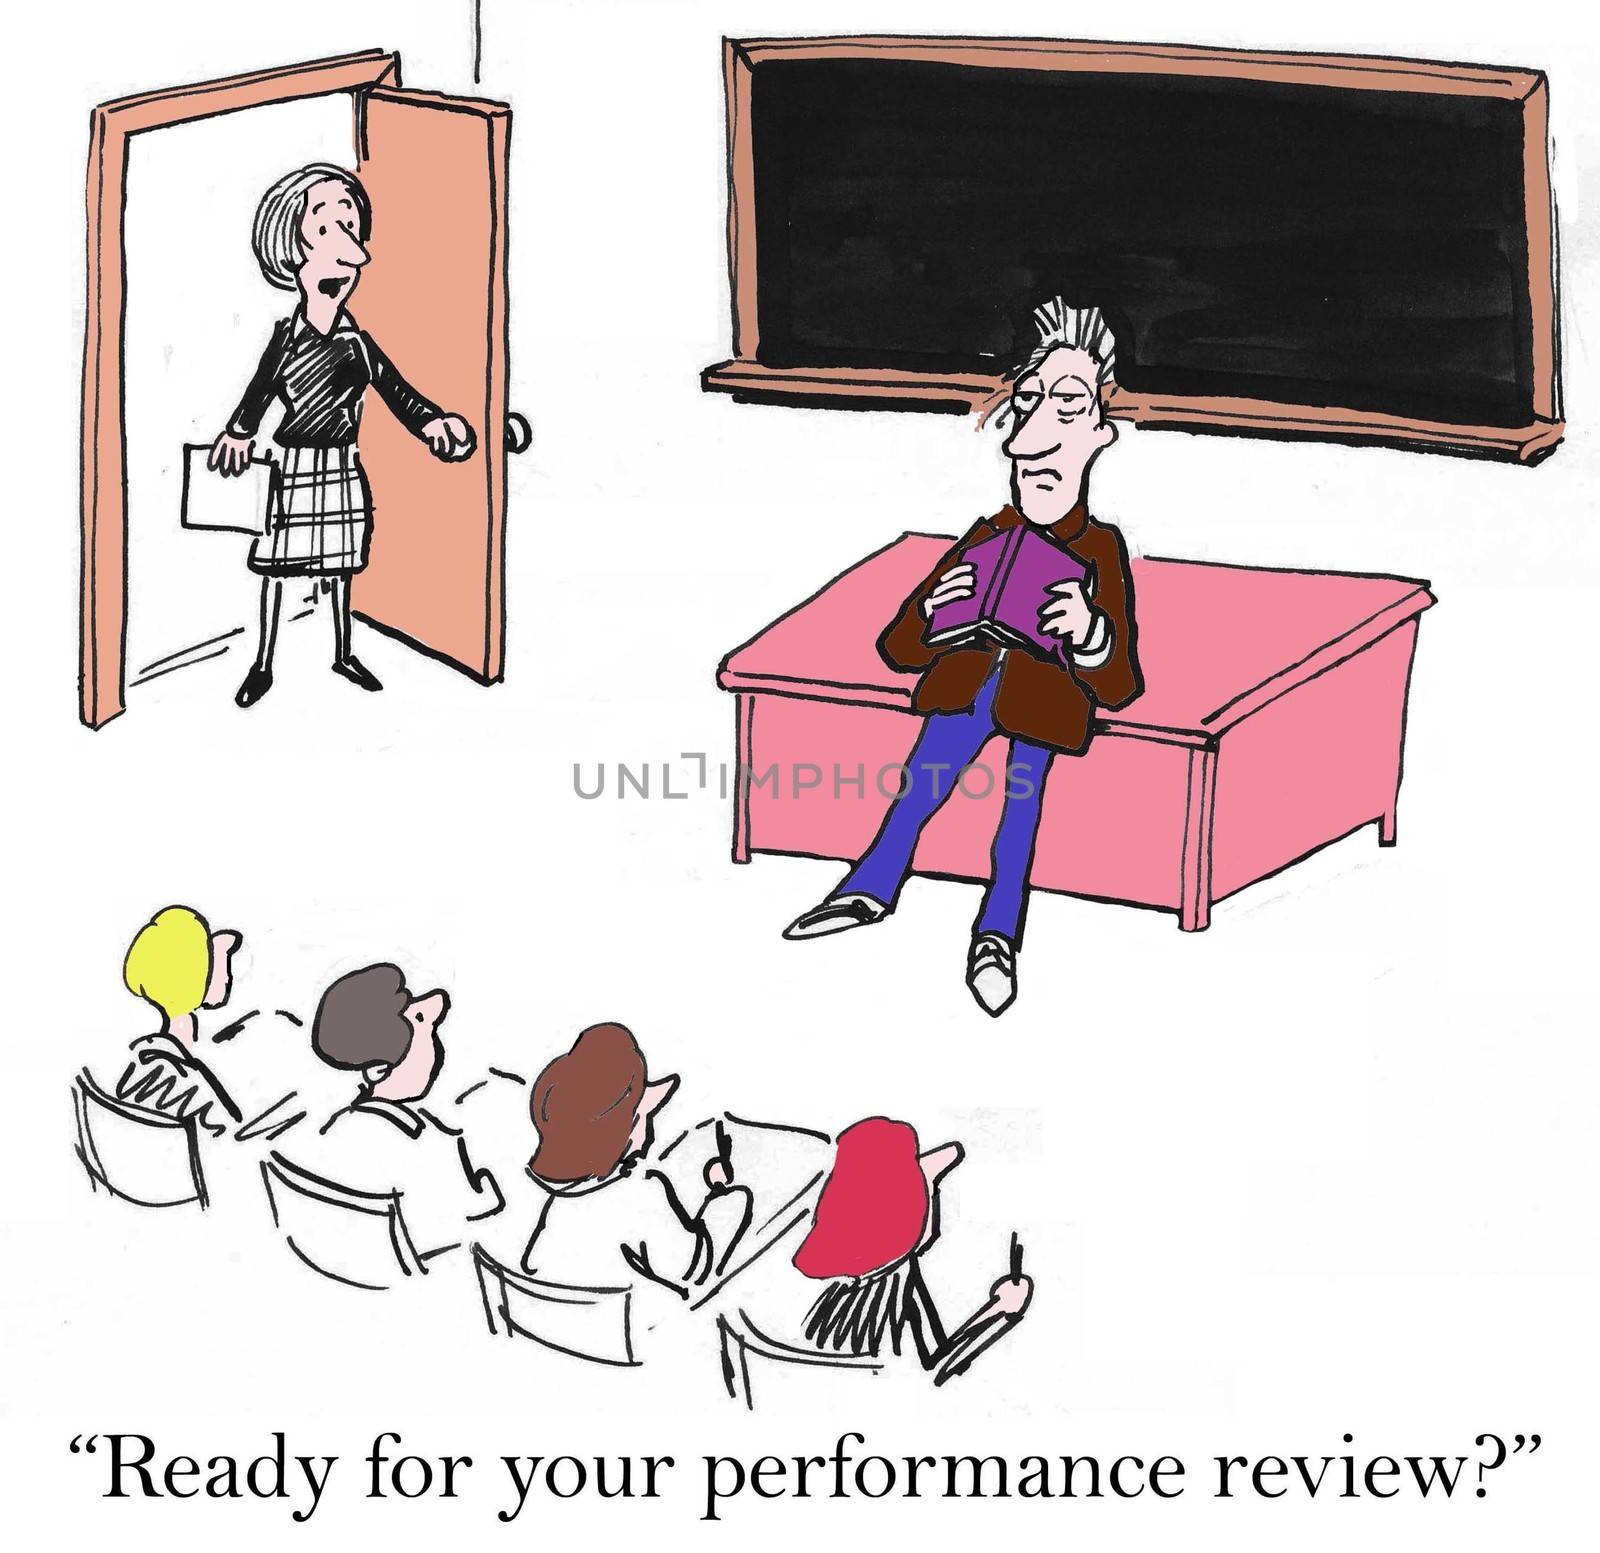 "Ready for your performance review?"